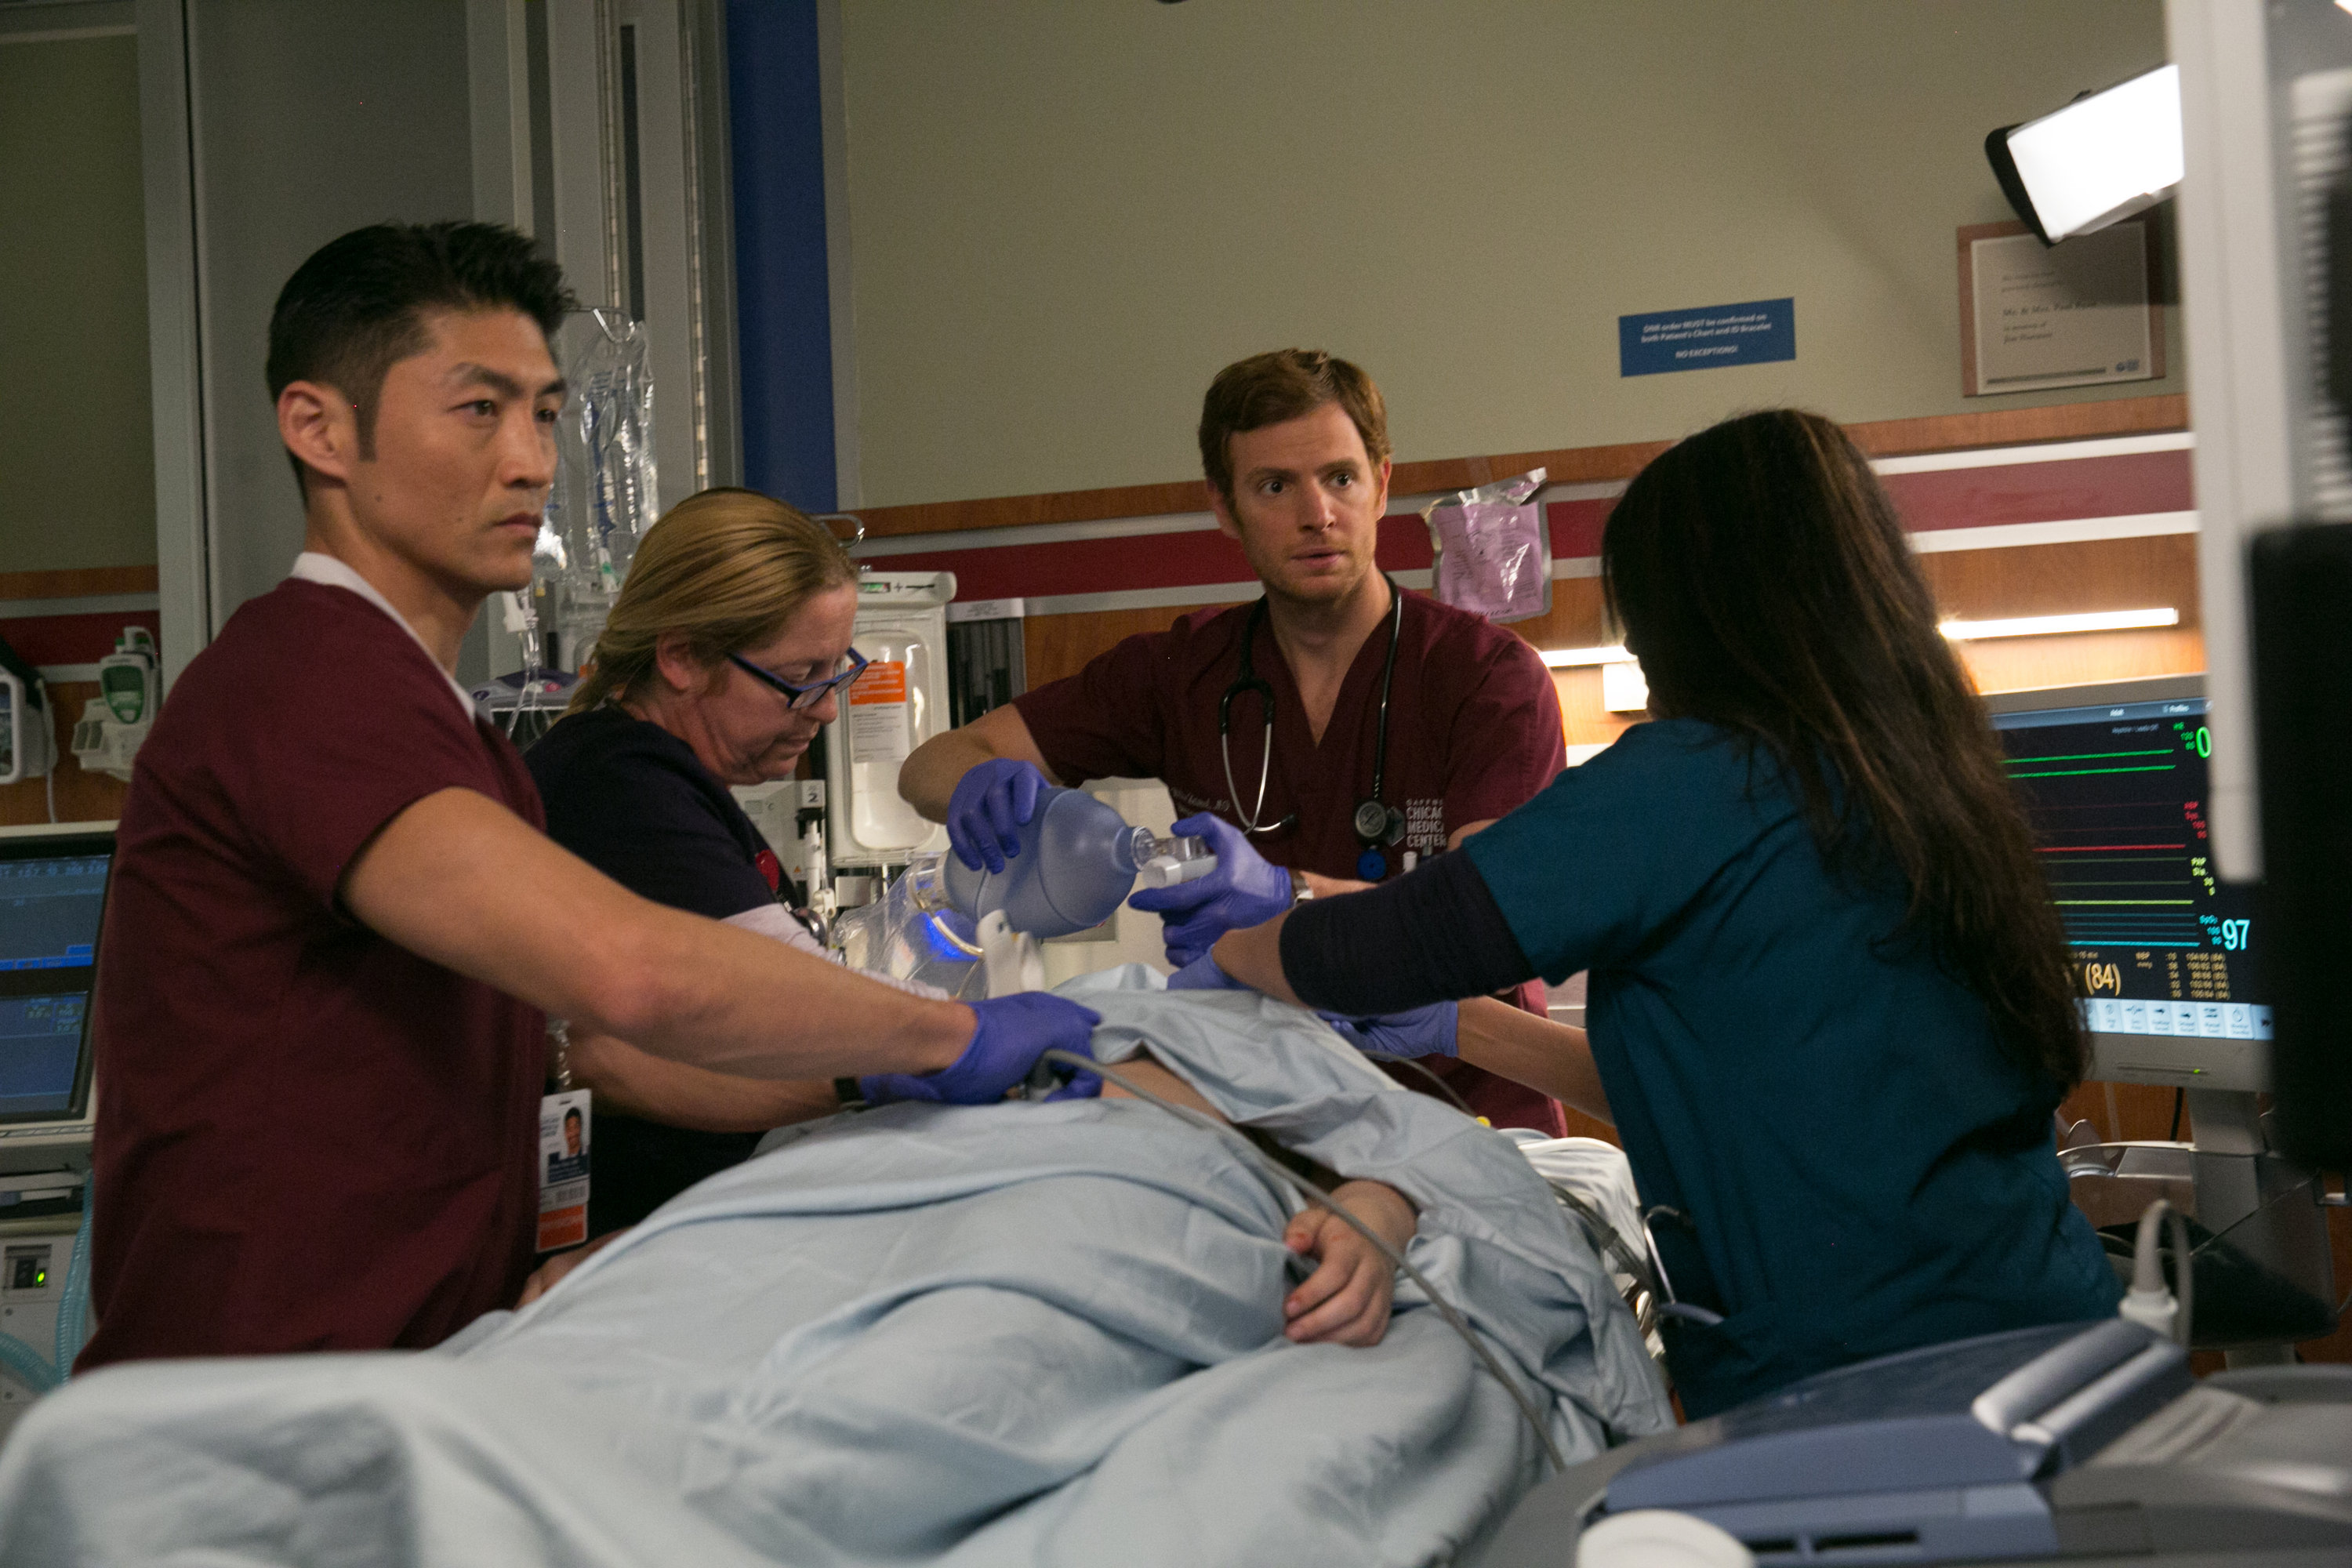 5 Reasons to Check Out Chicago Med